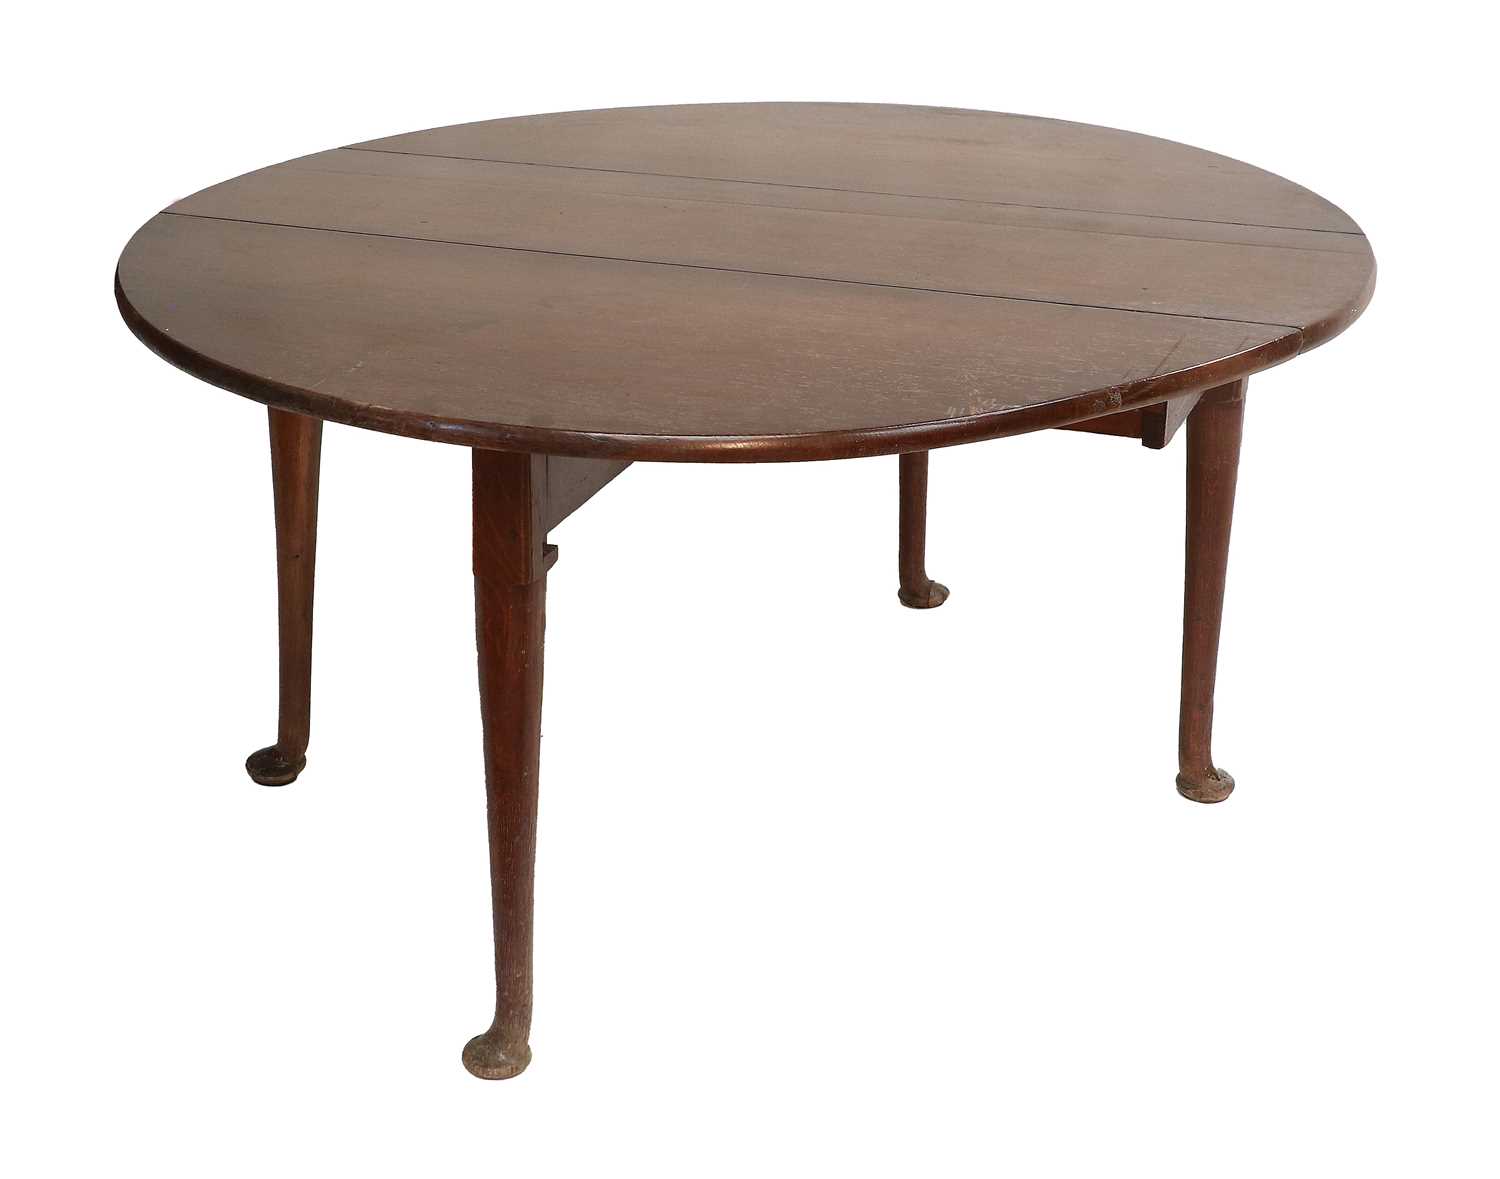 A 19th Century Oak Gateleg Dining Table, on plane supports with pad feet, 143cm (open) by 138cm by - Image 2 of 2